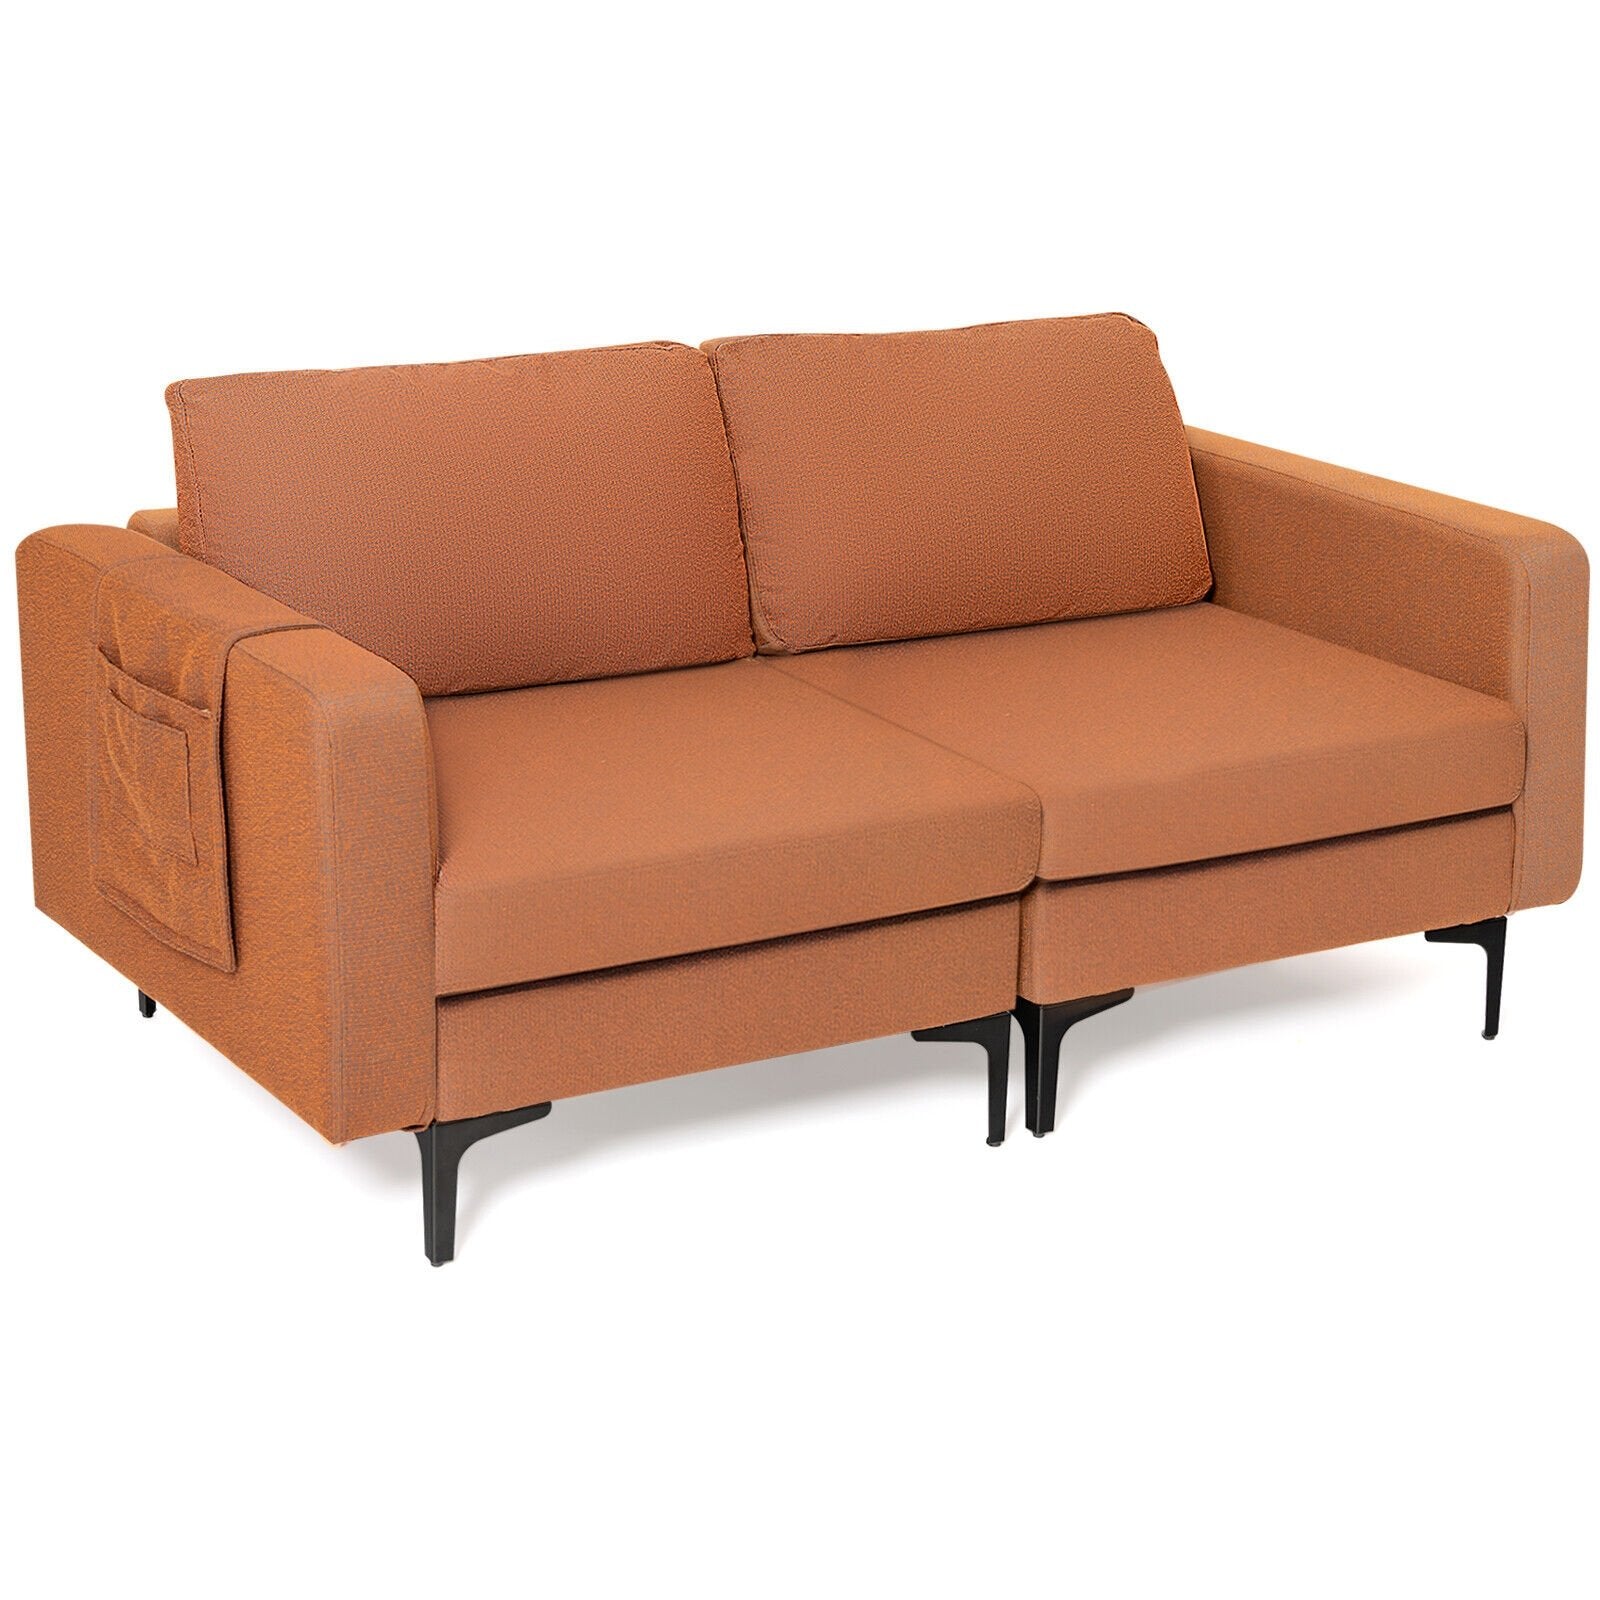 Modern Loveseat Sofa Couch with Side Storage Pocket and Sponged Padded Seat Cushions, Orange at Gallery Canada